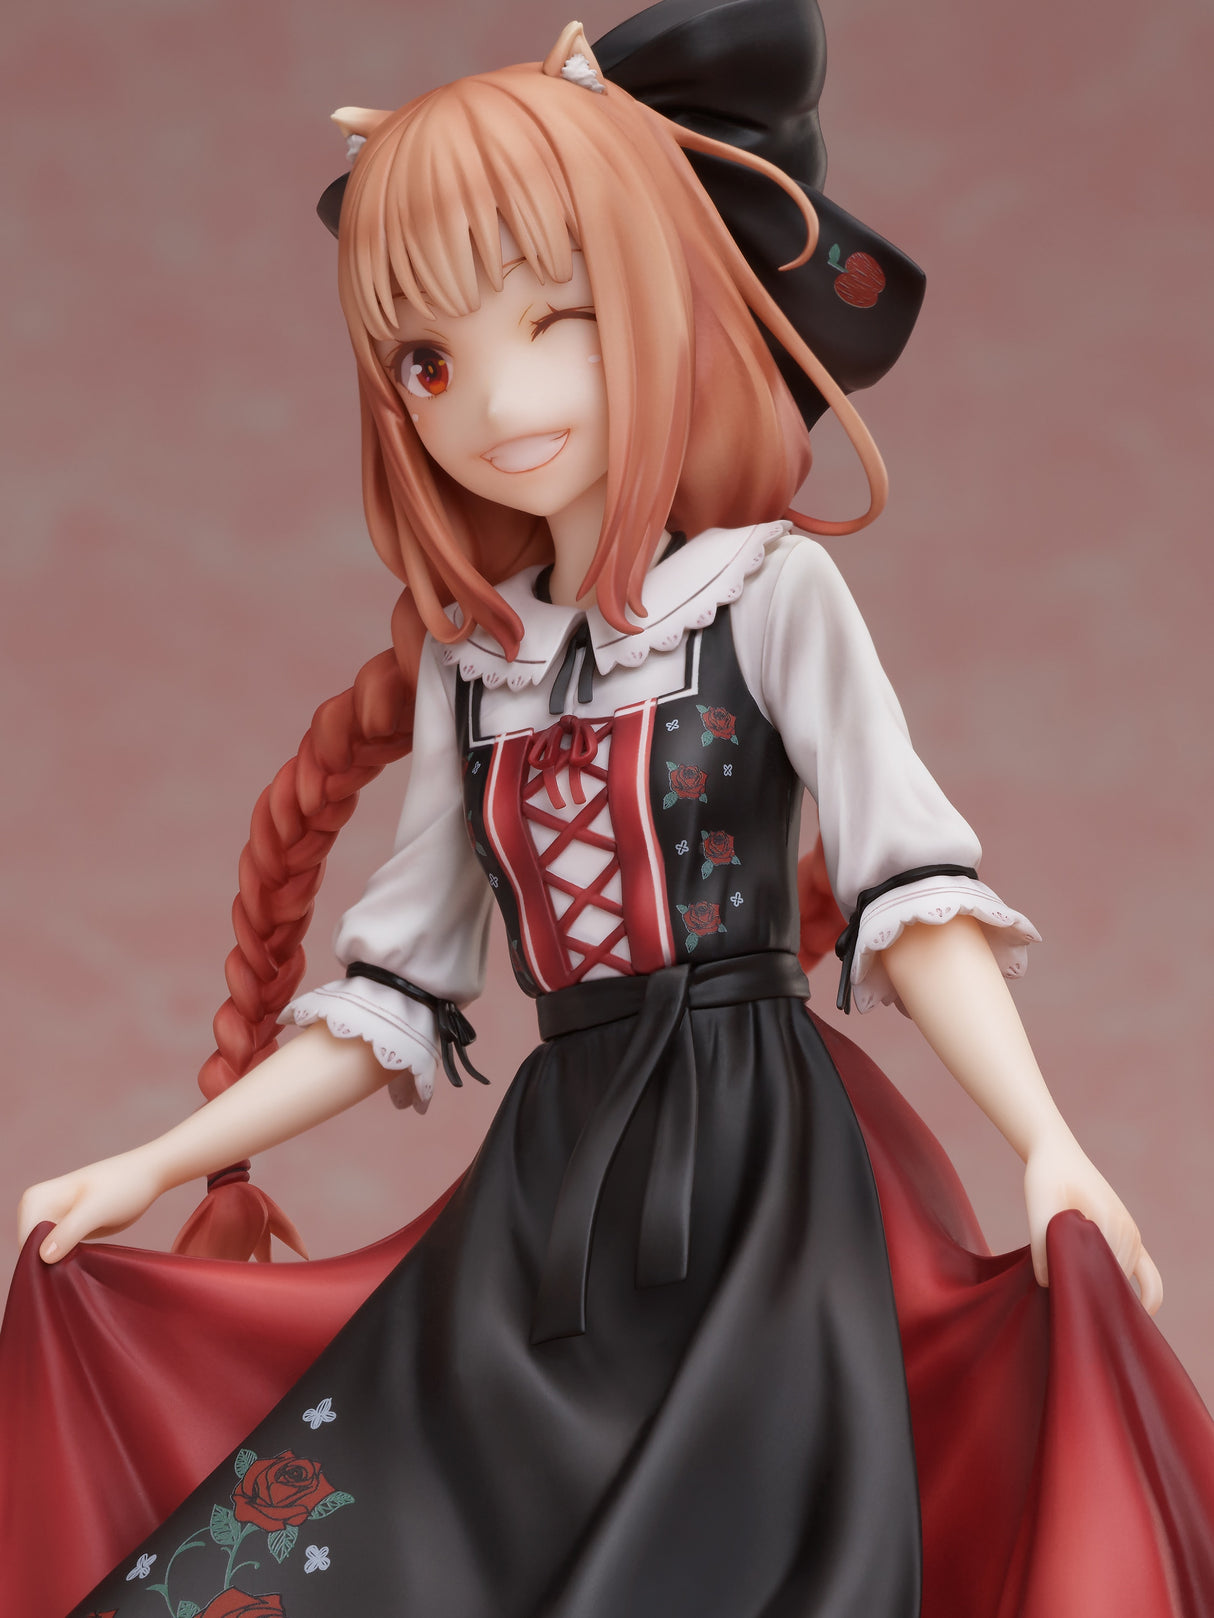 Wise Wolf's Elegance: Holo in National Costume from "Spice and Wolf"